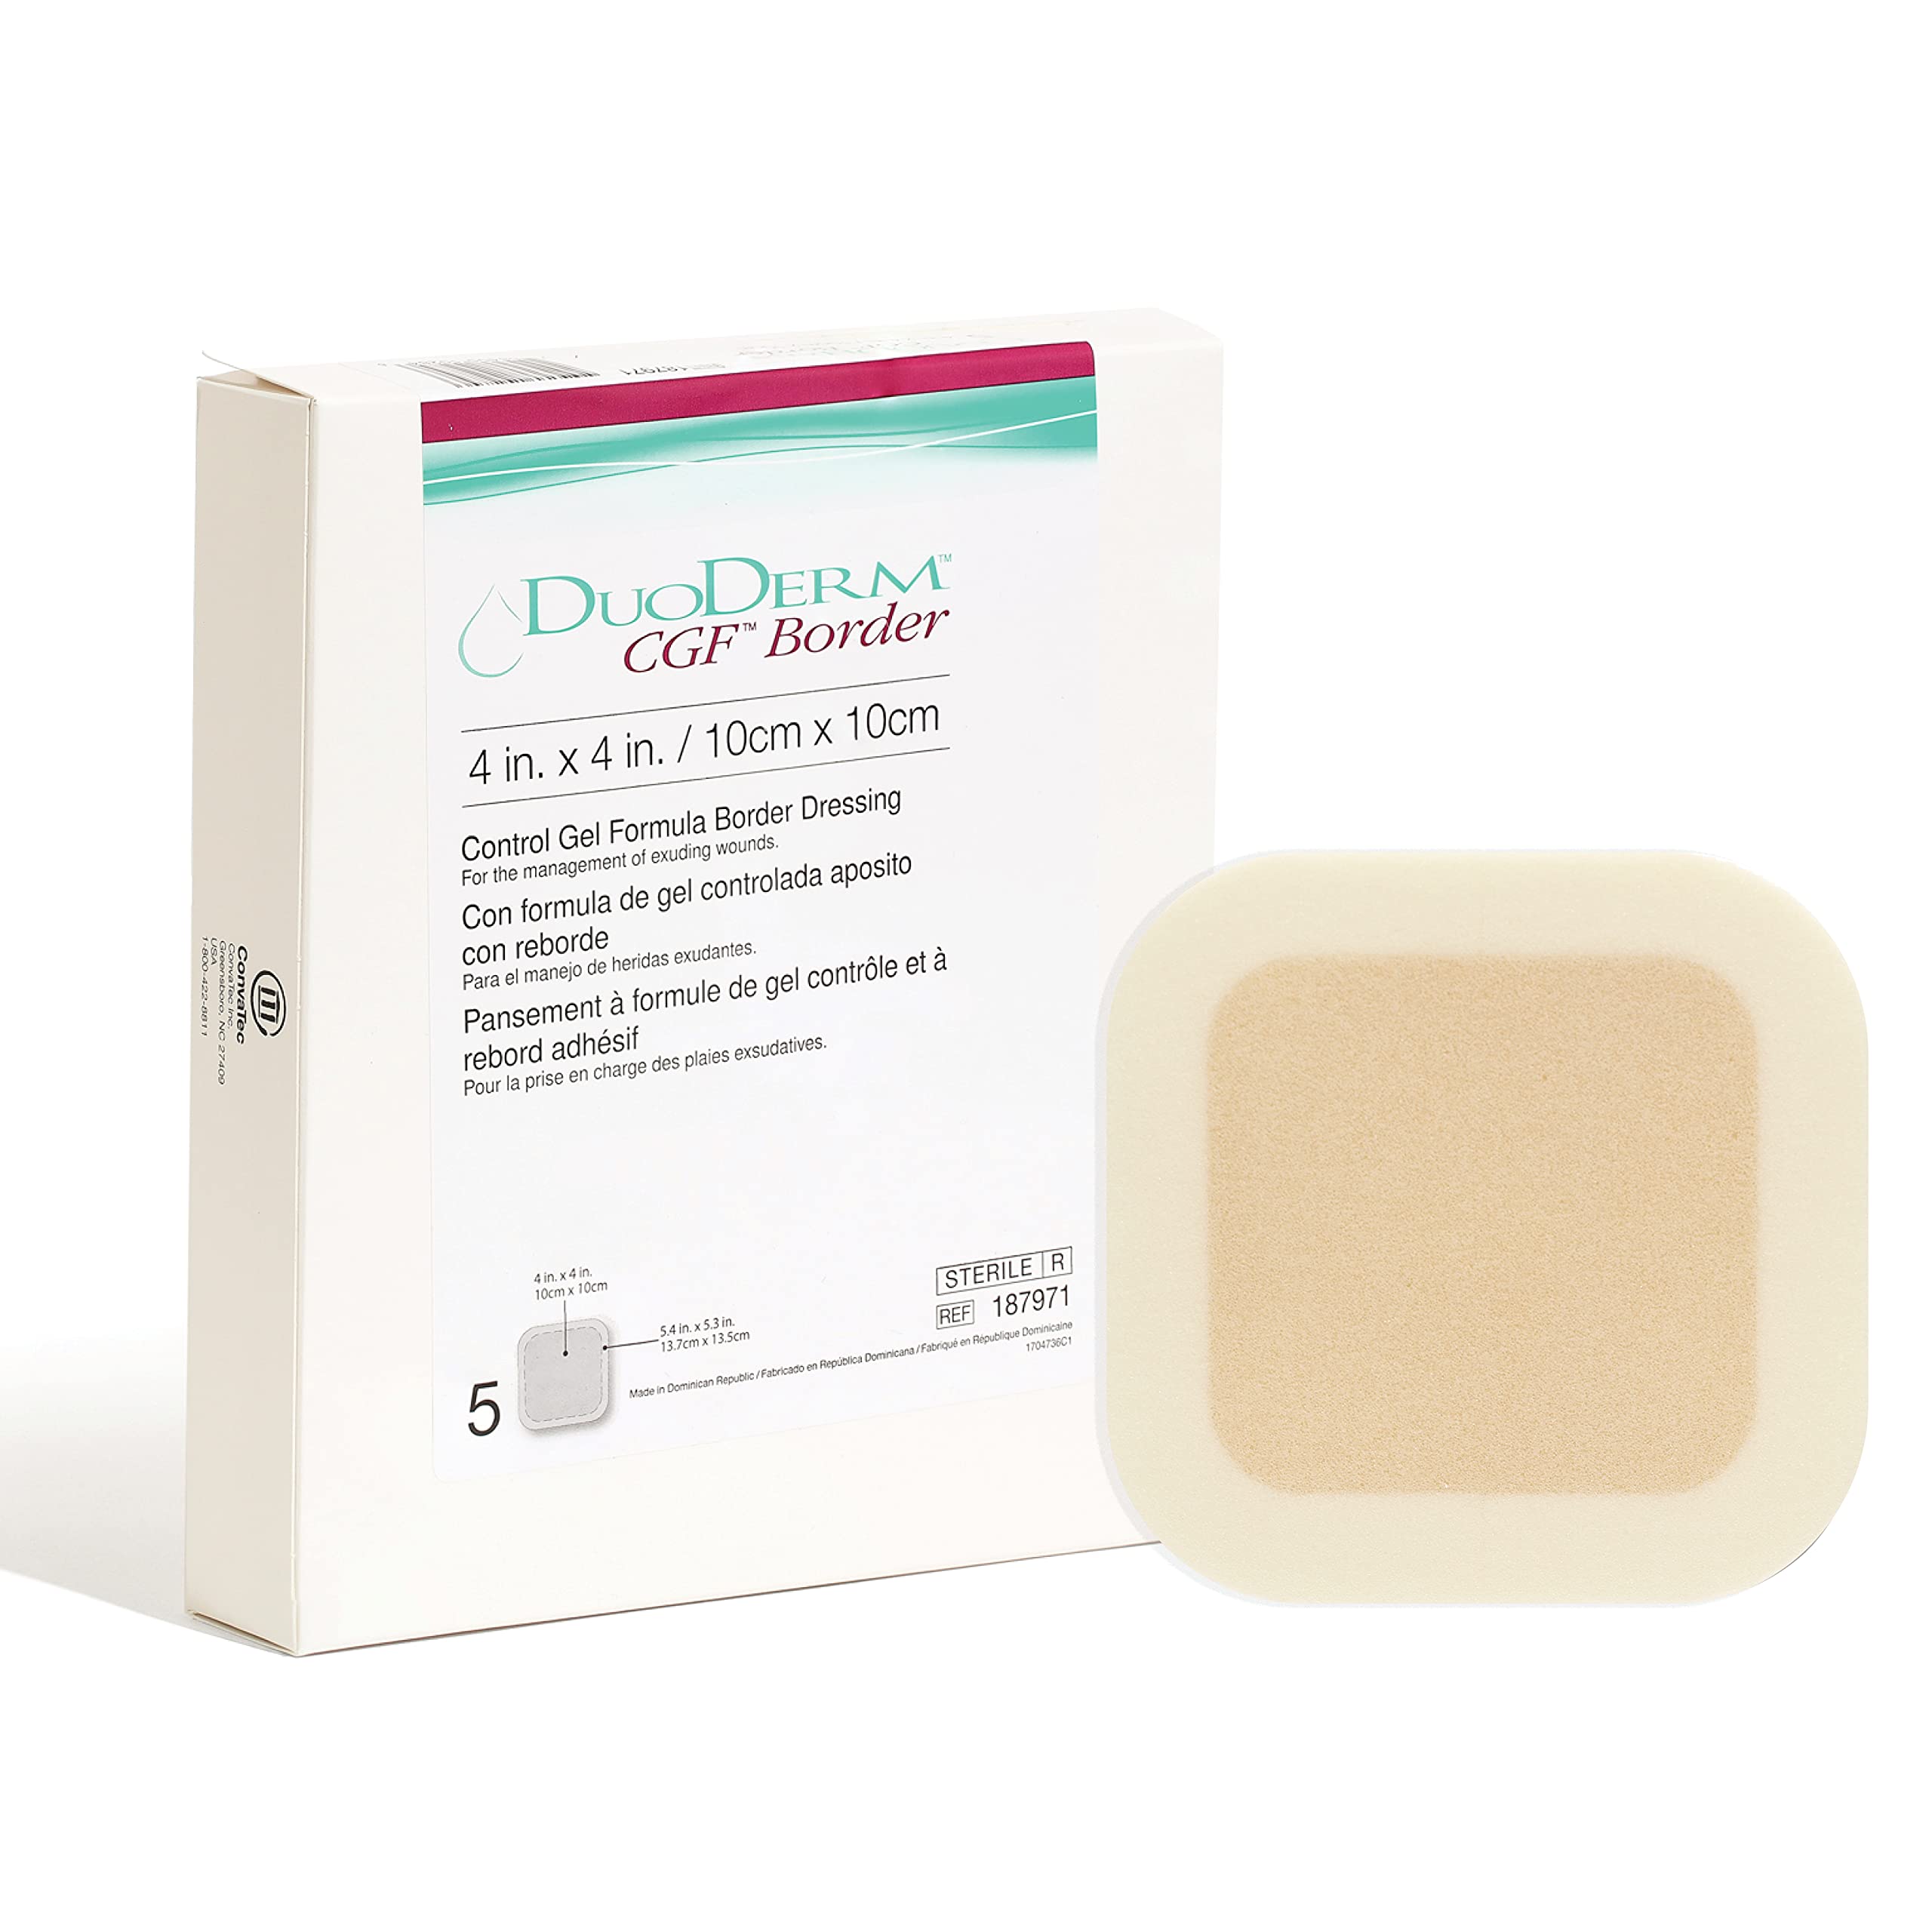 DuoDERM CGF Hydrocolloid 4"x4" Sterile Square Dressing with Border for Hard to Dress Wounds, Square, Beige, 187971, Box of 5